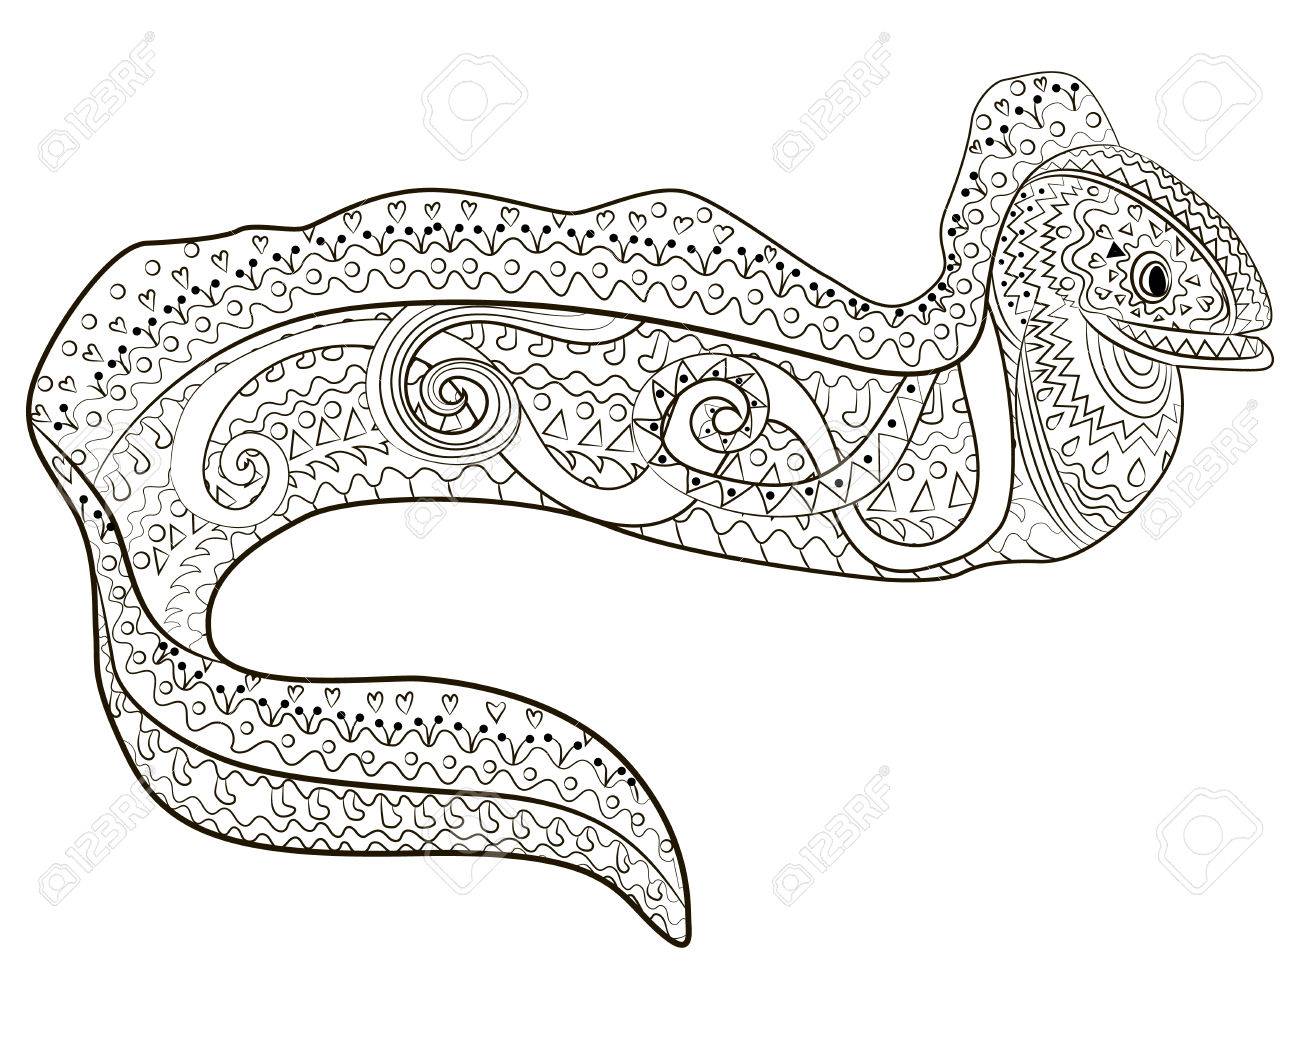 Ugly and creepy fish with high details for anti stress coloring page illustration of a moray in tracery style sketch of moray eel for tattoo poster print t